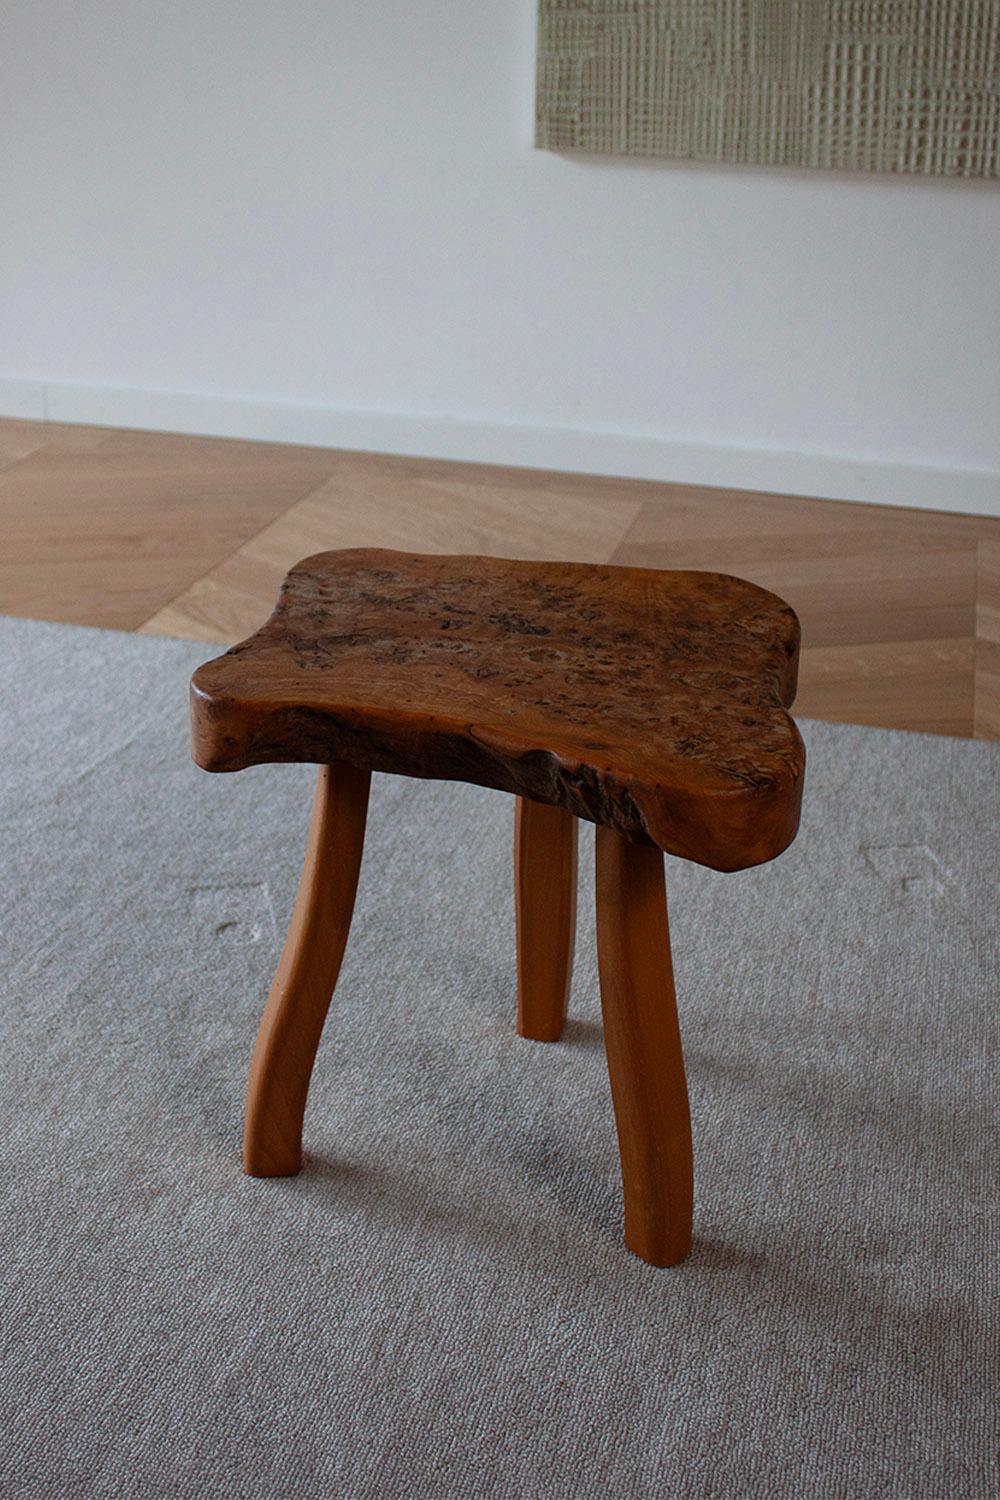 Primitive French hand carved Burl wood Three Legged Stool (2 of 4) For Sale